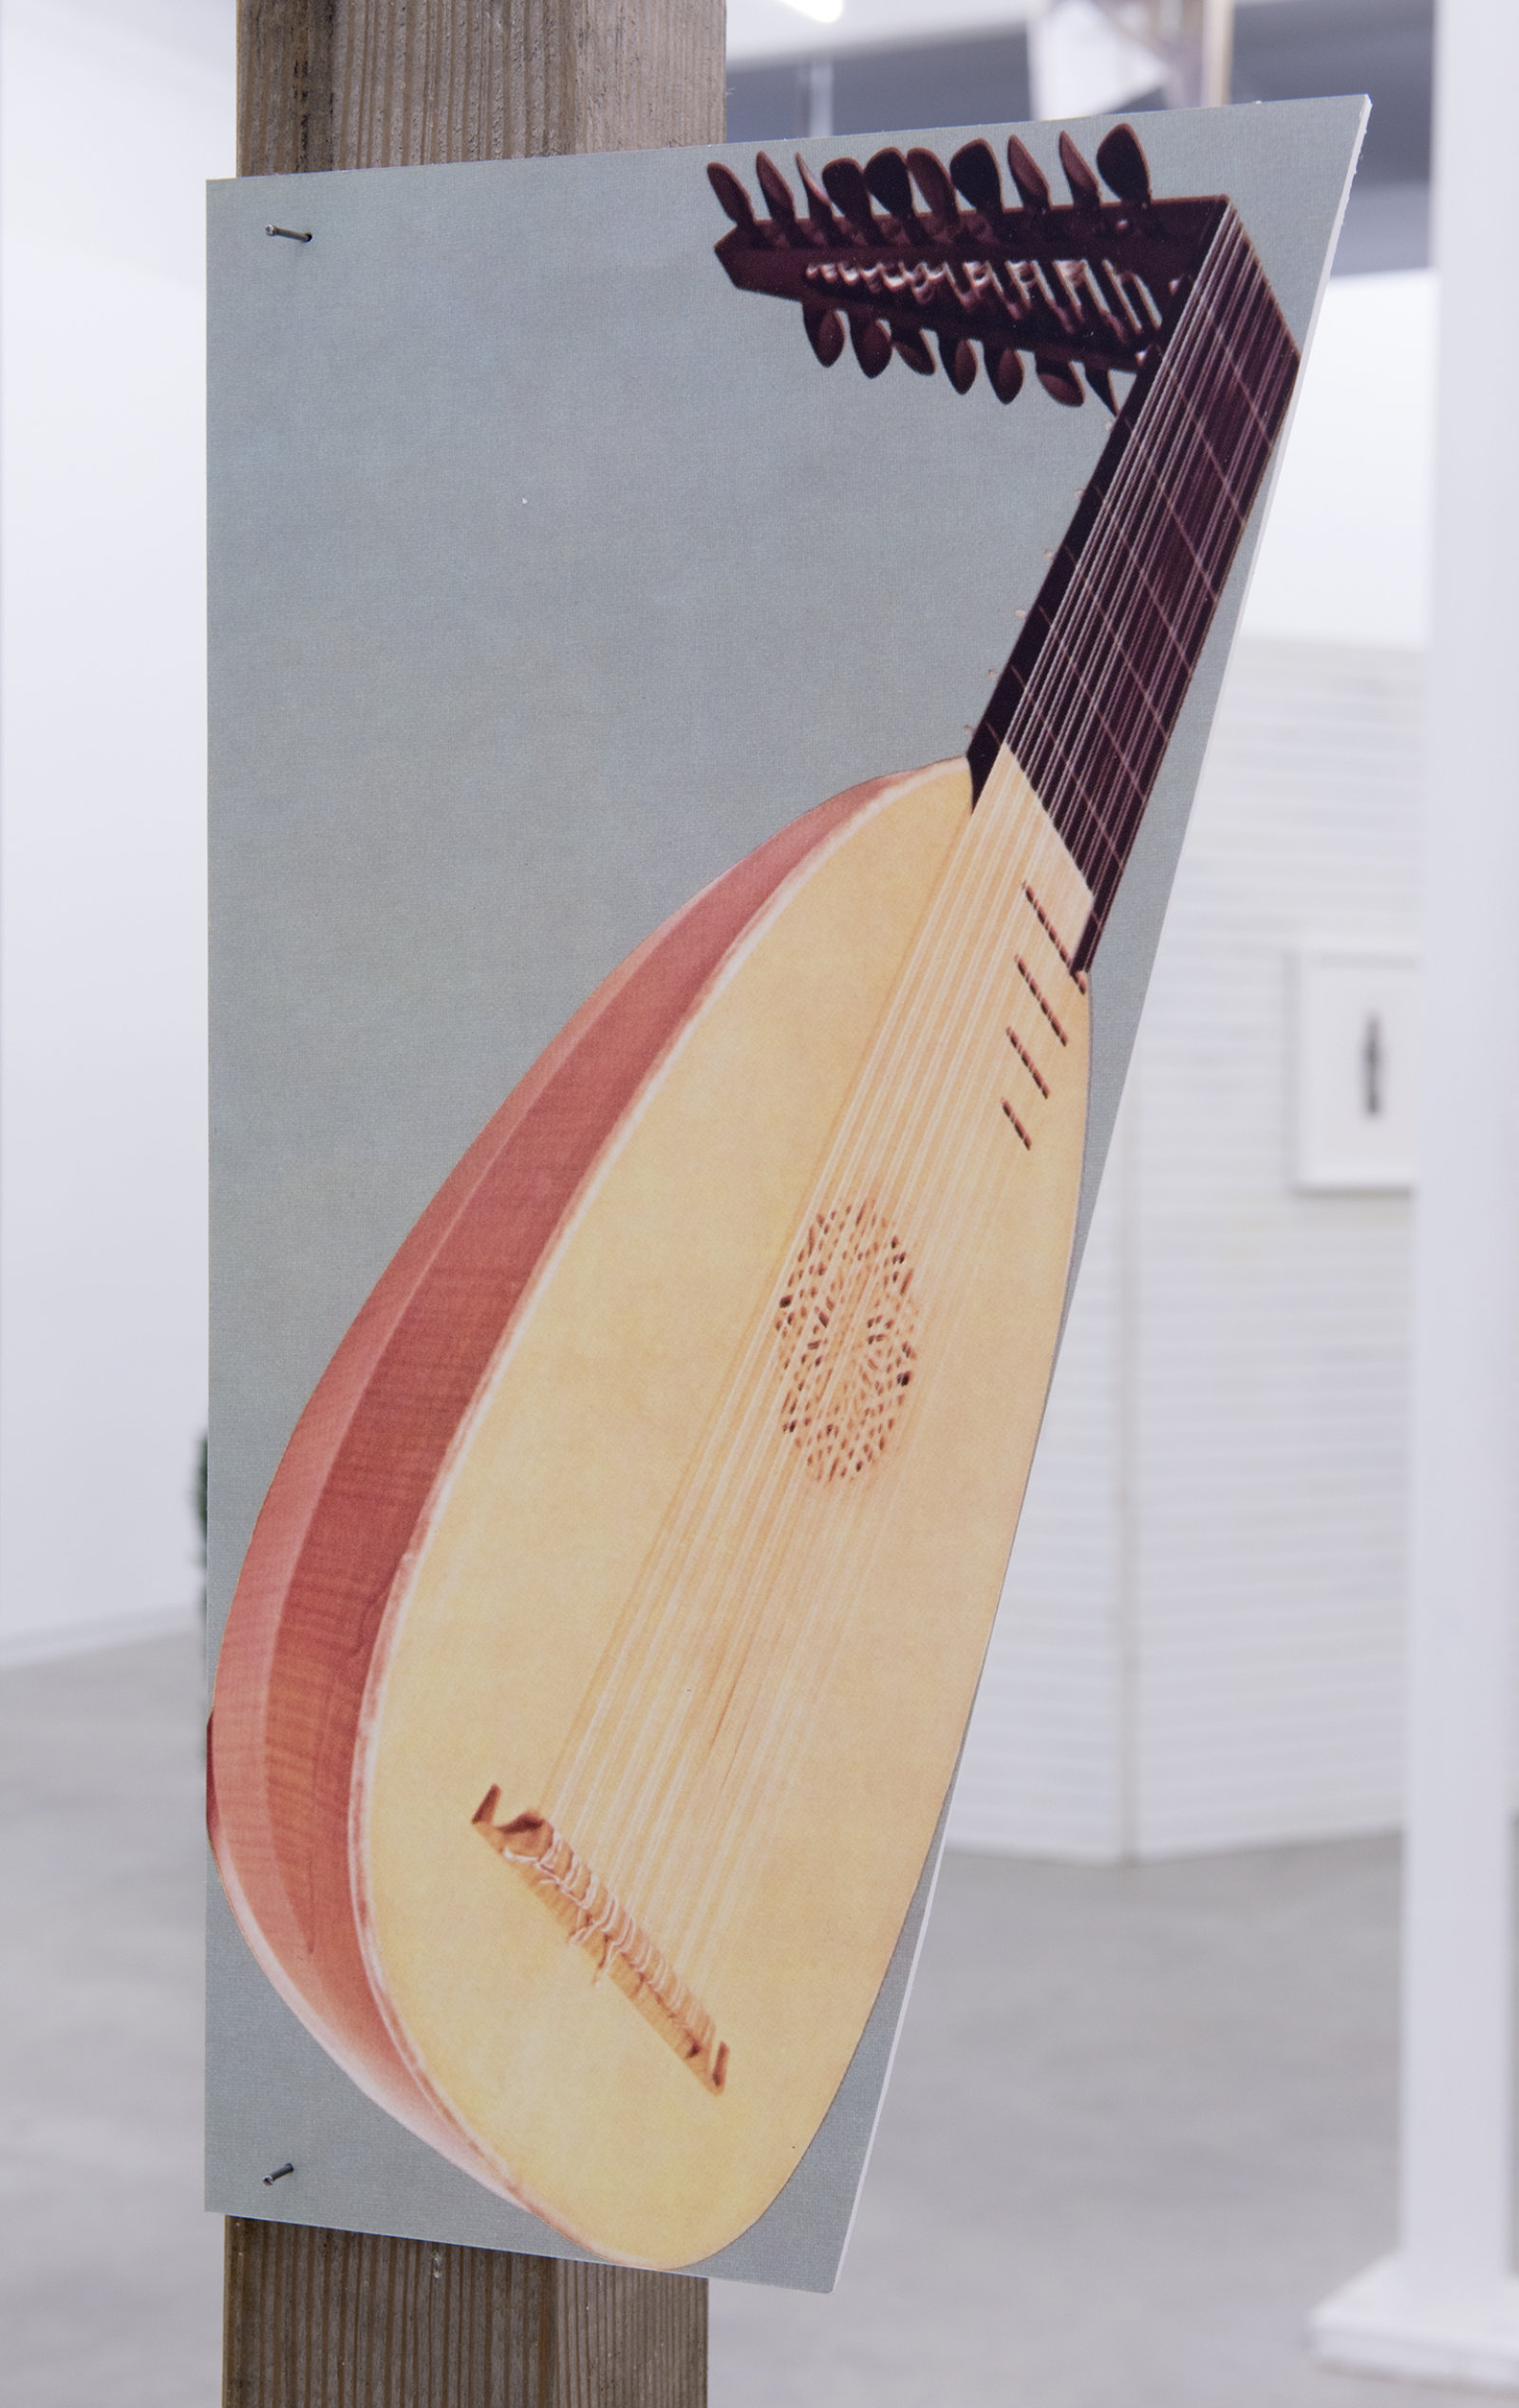 Geoffrey Farmer, This one is the lightness of a palm frond, the sound of a lute, the colour of fruit. The expressions of a monkey. A large orange eye. I drift in the warm wind. (detail), 2014, douglas fir pole, 6 photographs mounted on foamcore, 200 x 4 x 4 in. (508 x 9 x 9 cm)